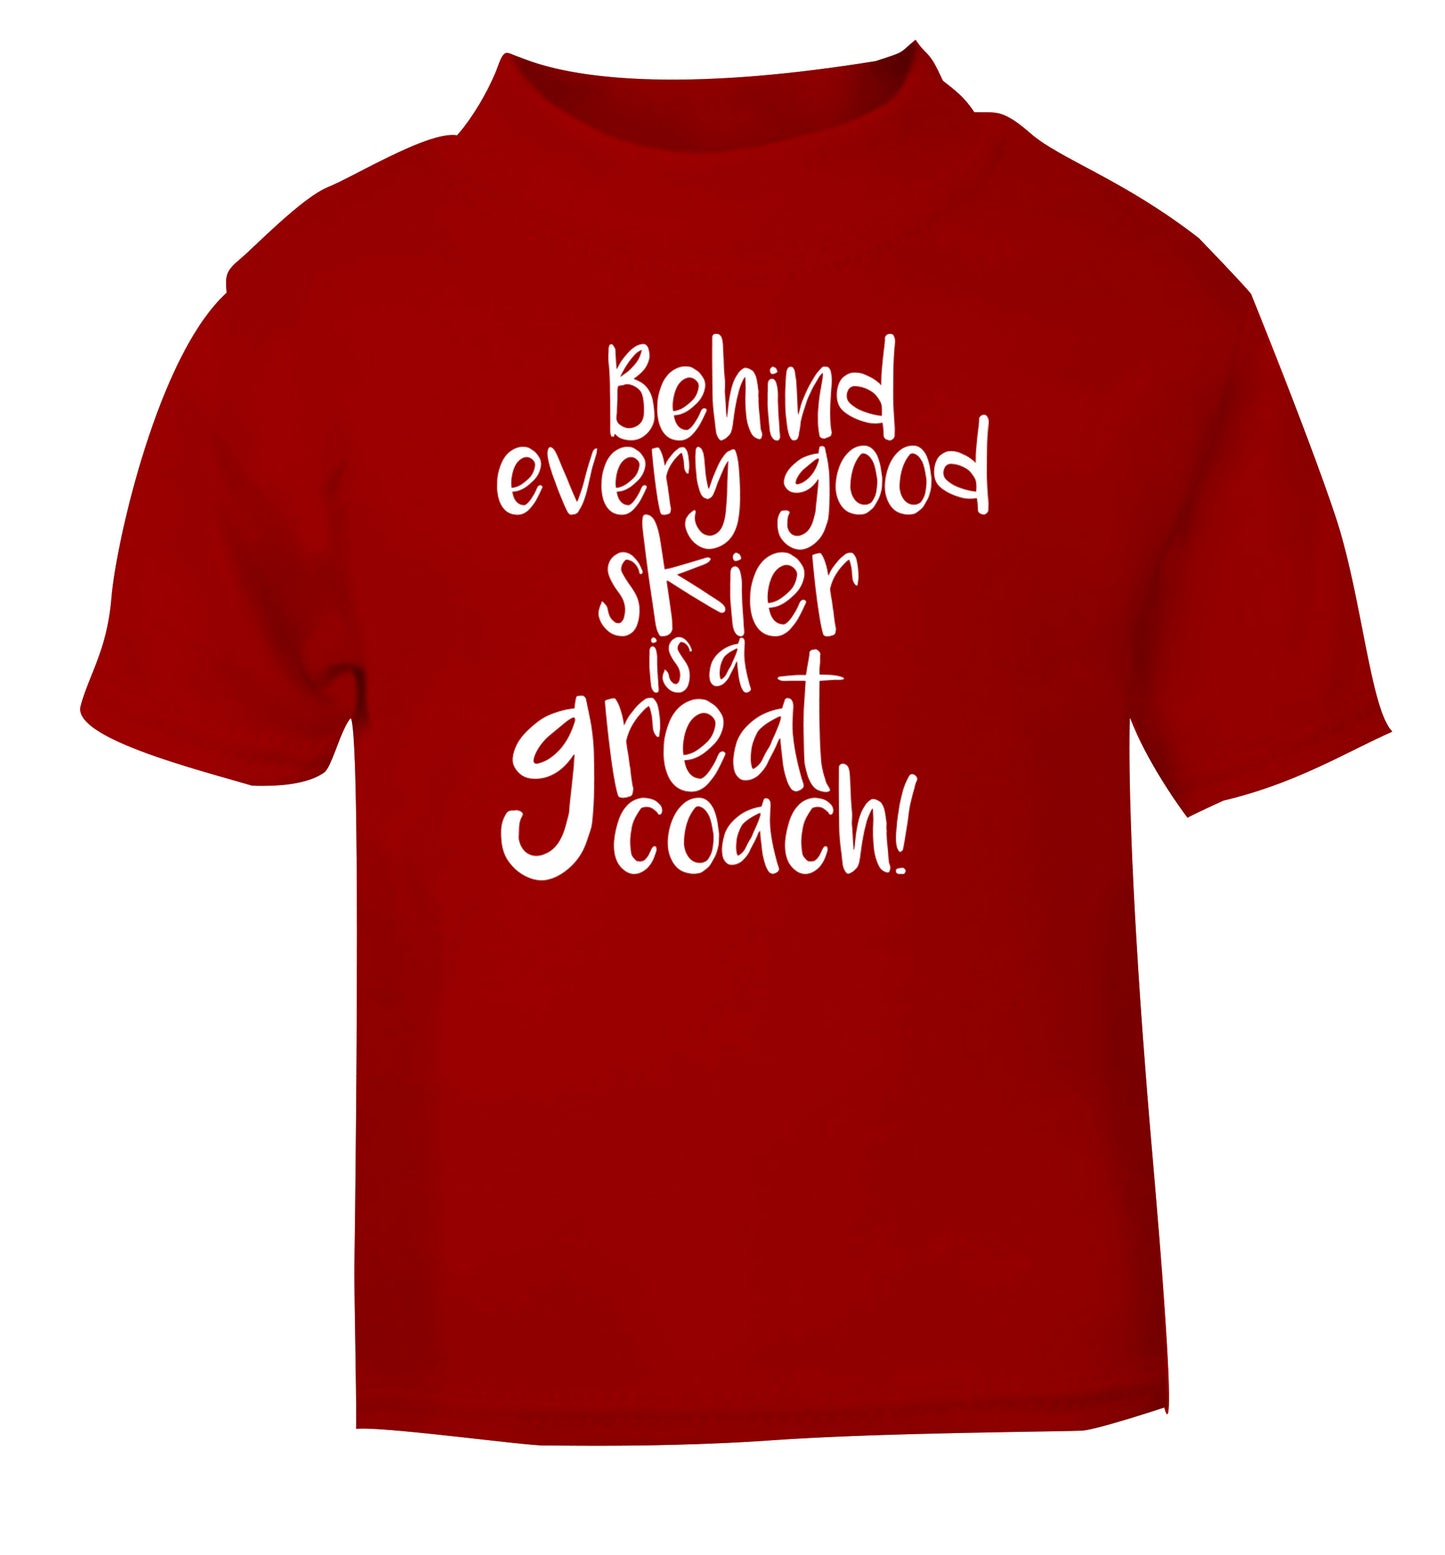 Behind every good skier is a great coach! red Baby Toddler Tshirt 2 Years